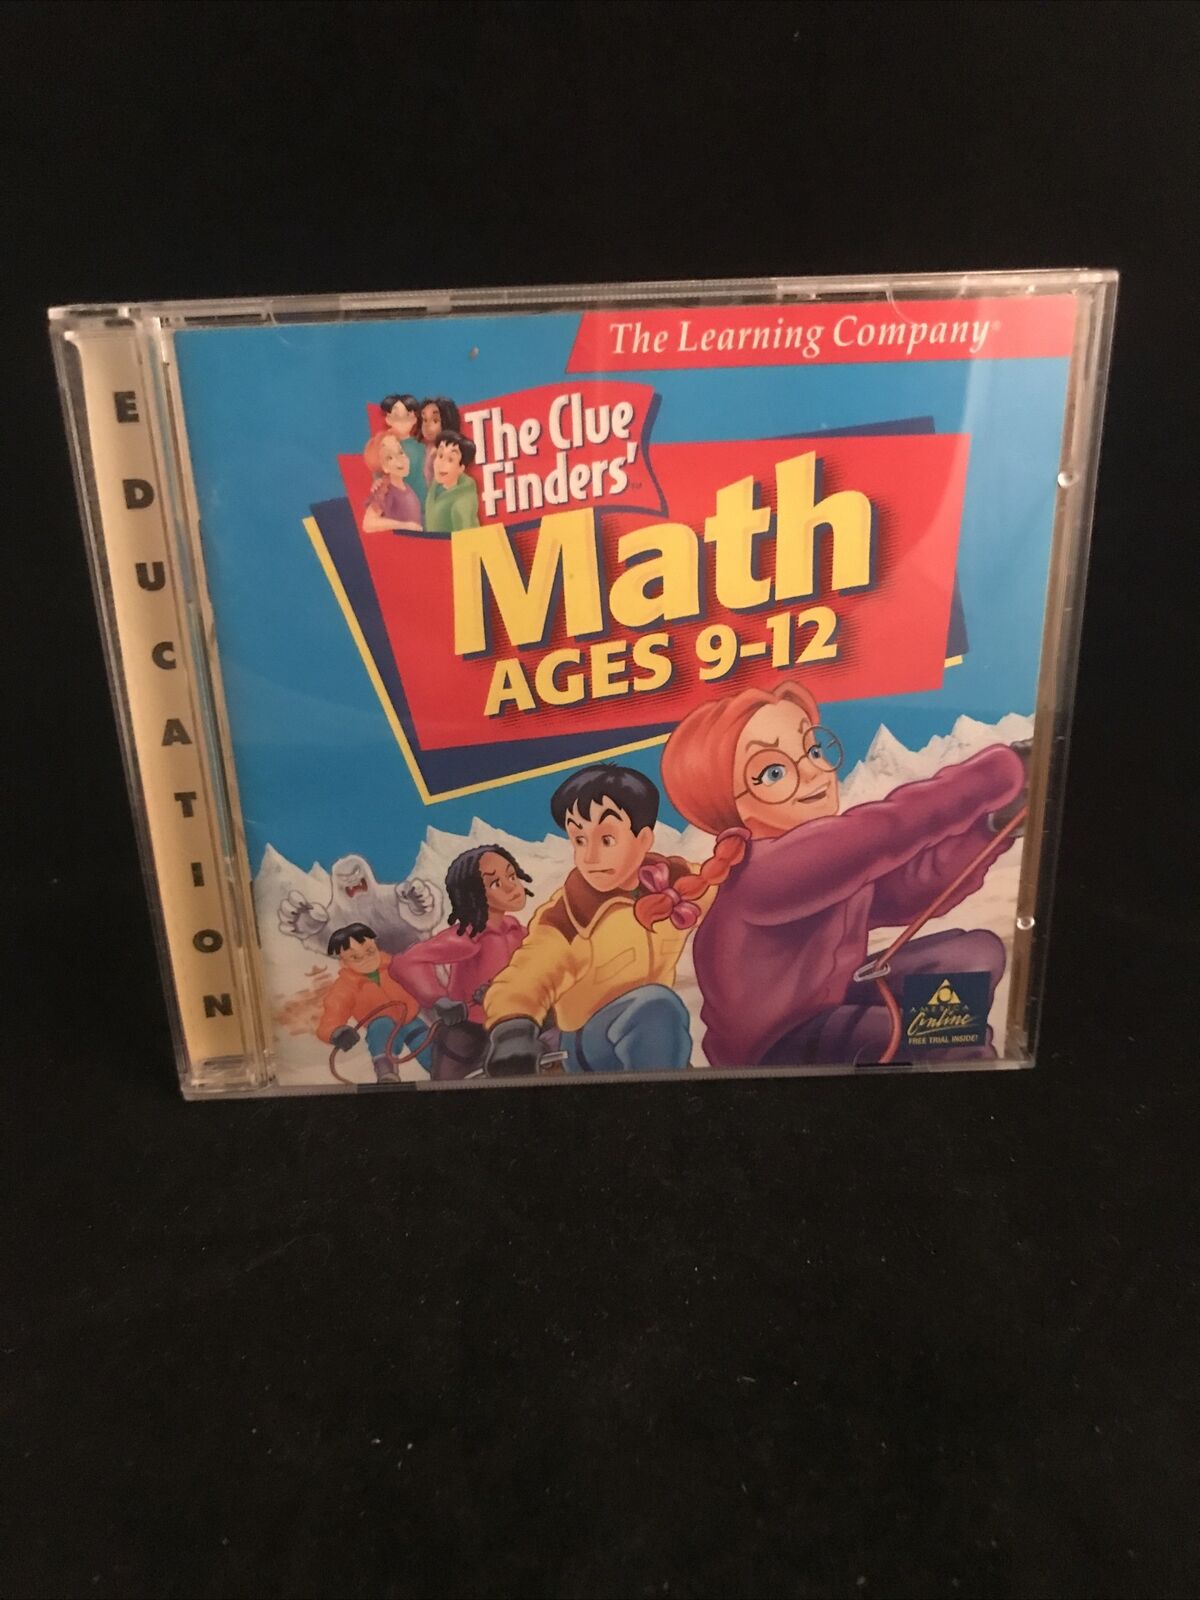 The Clue Finders' Math Ages 9-12 (PC, 1998) Game Windows/Mac Vintage Complete